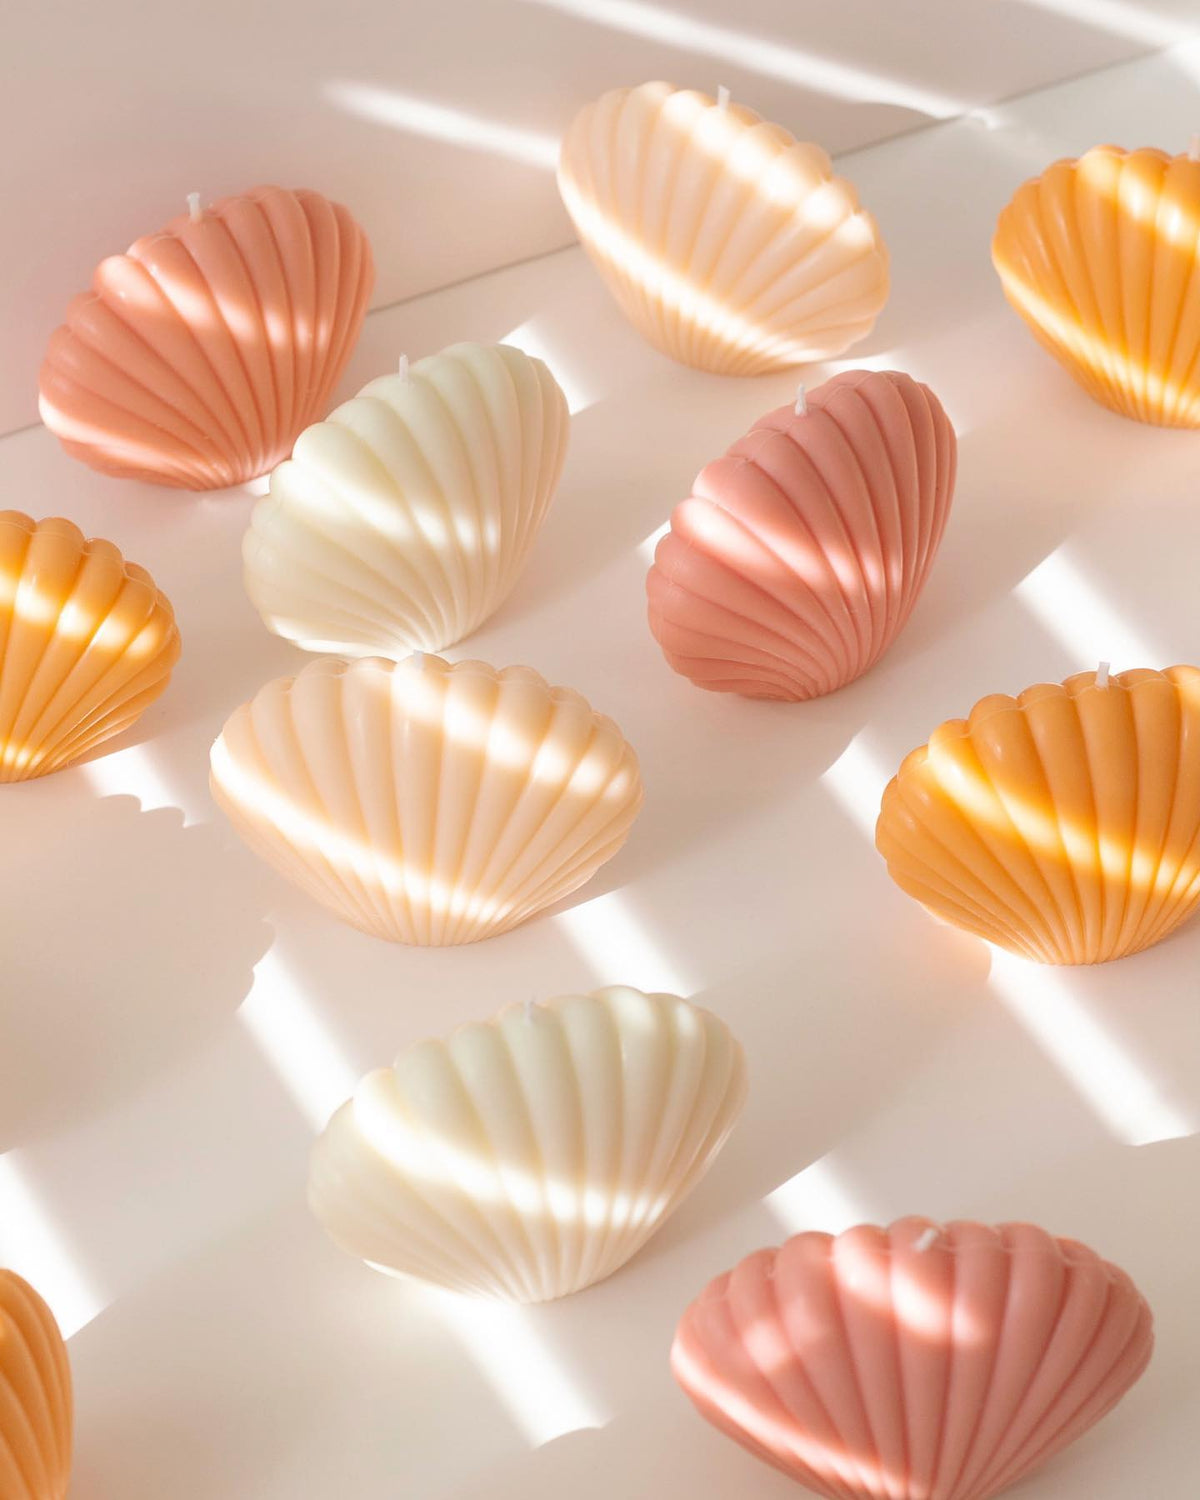 Shell candles